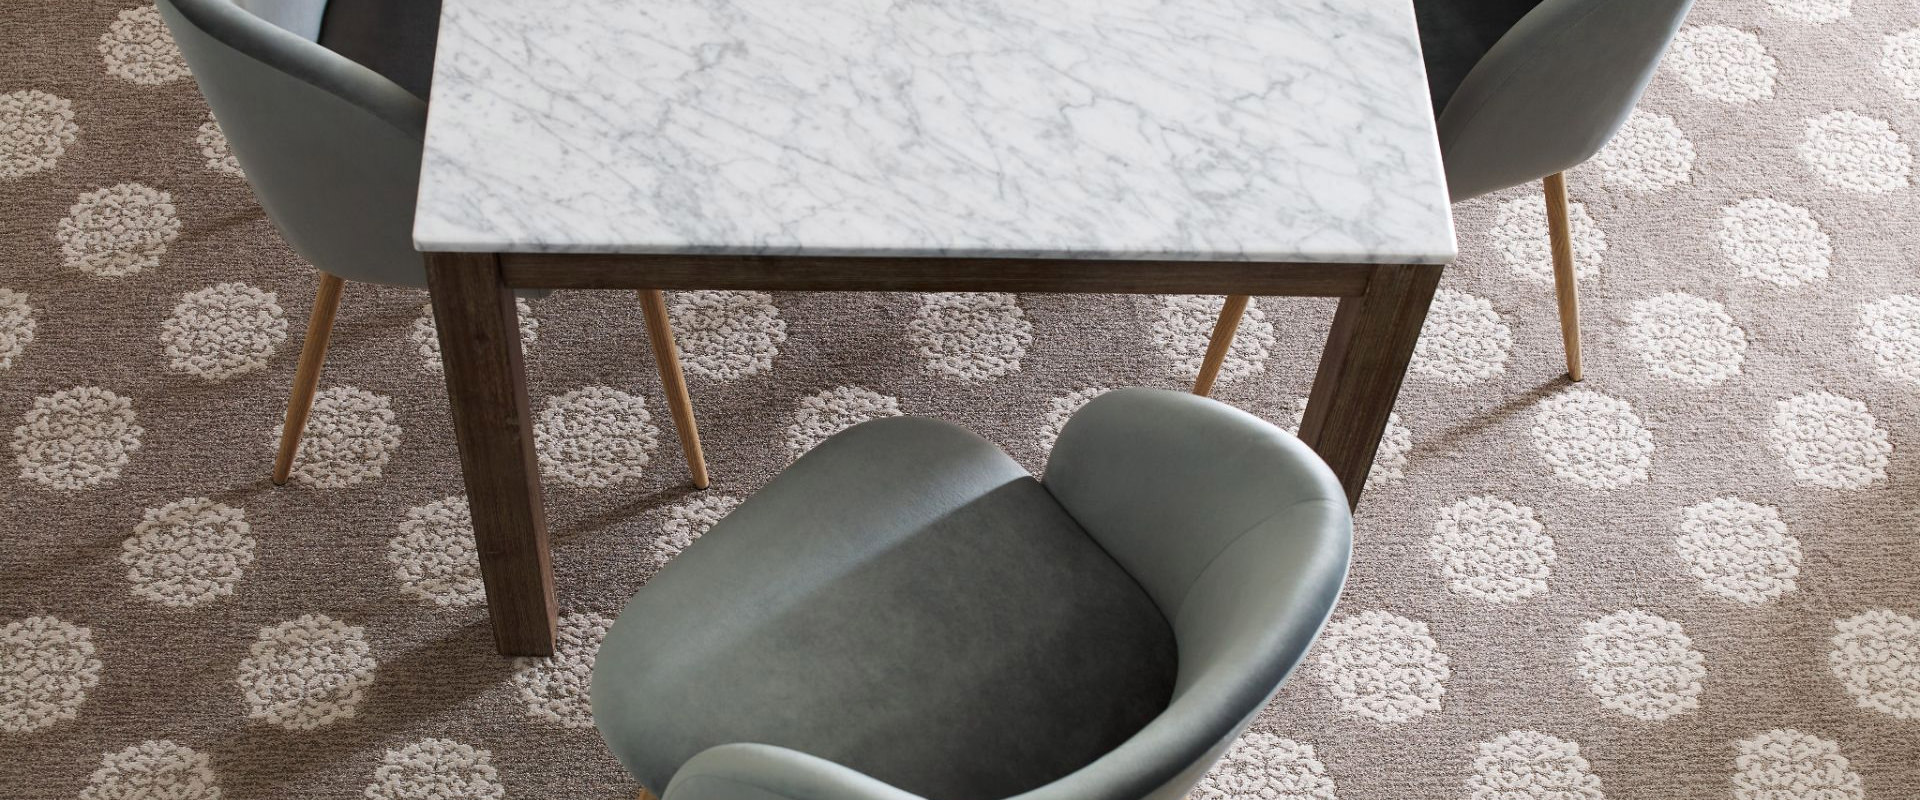 Photo of stylish chairs and table on Anderson Tuftex rug